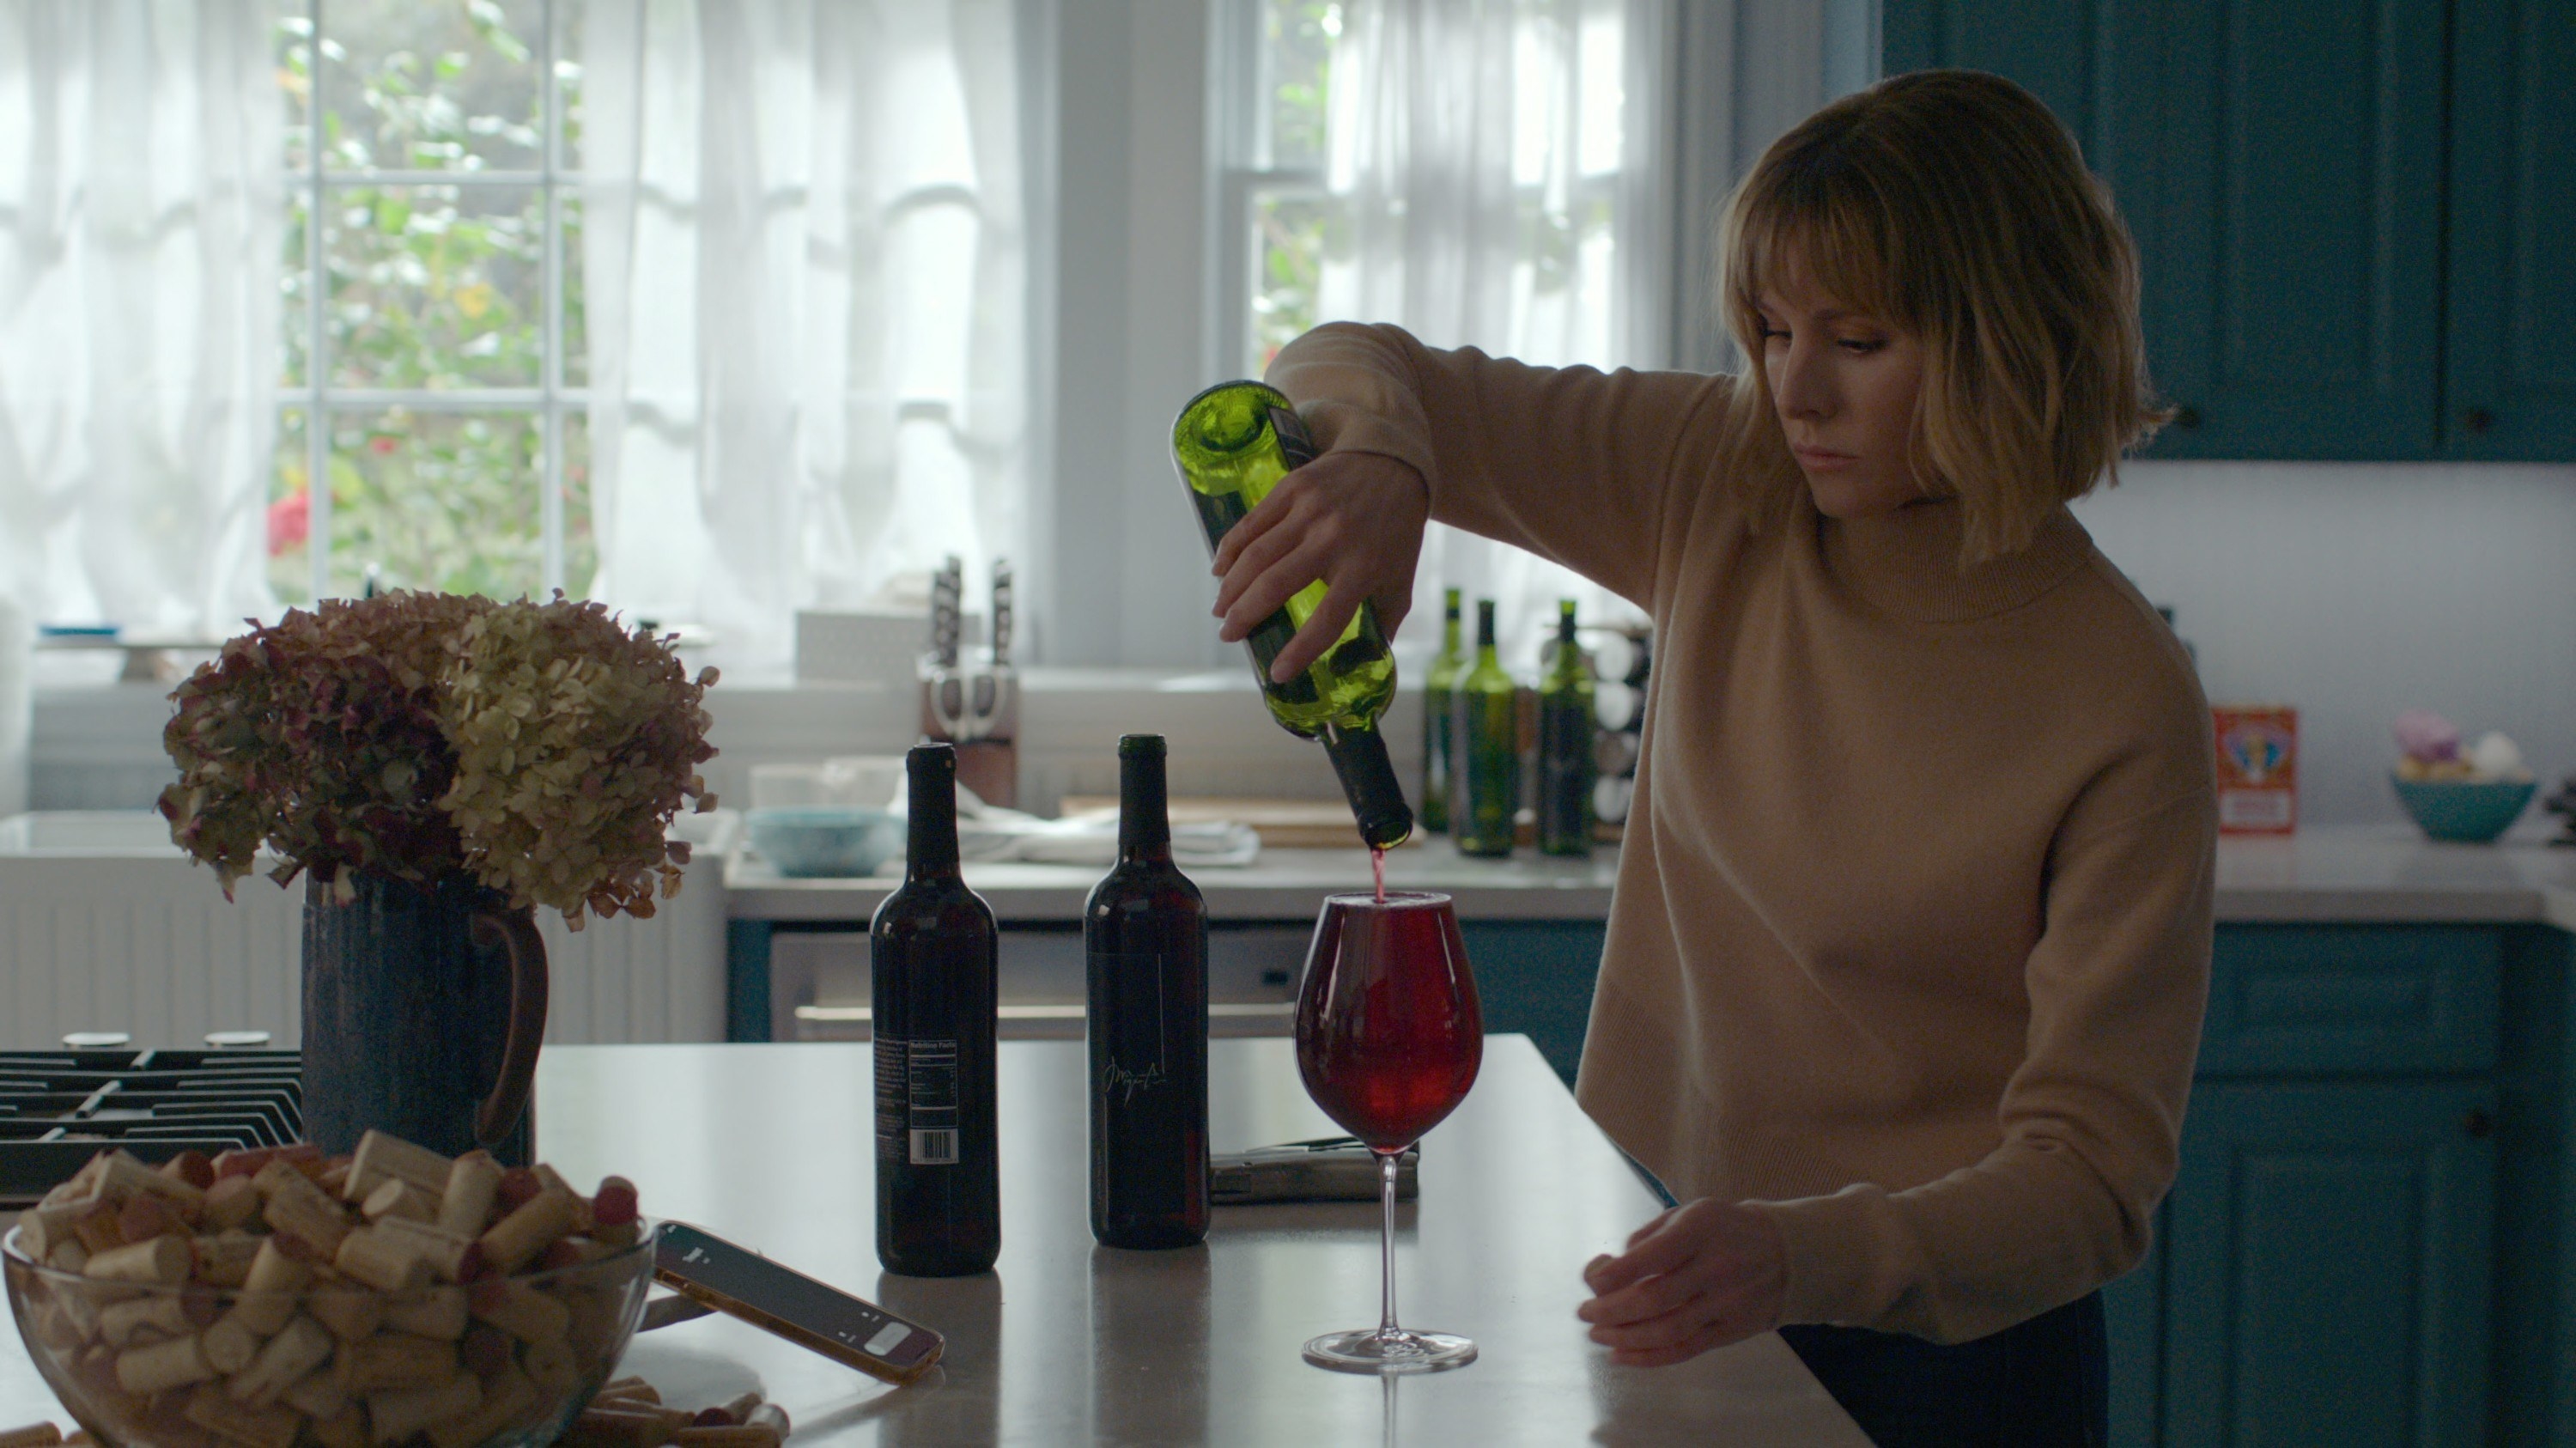 Kristin&#x27;s character standing at the kitchen island filling a wine glass to the brim and three empty wine bottles on the counter behind her